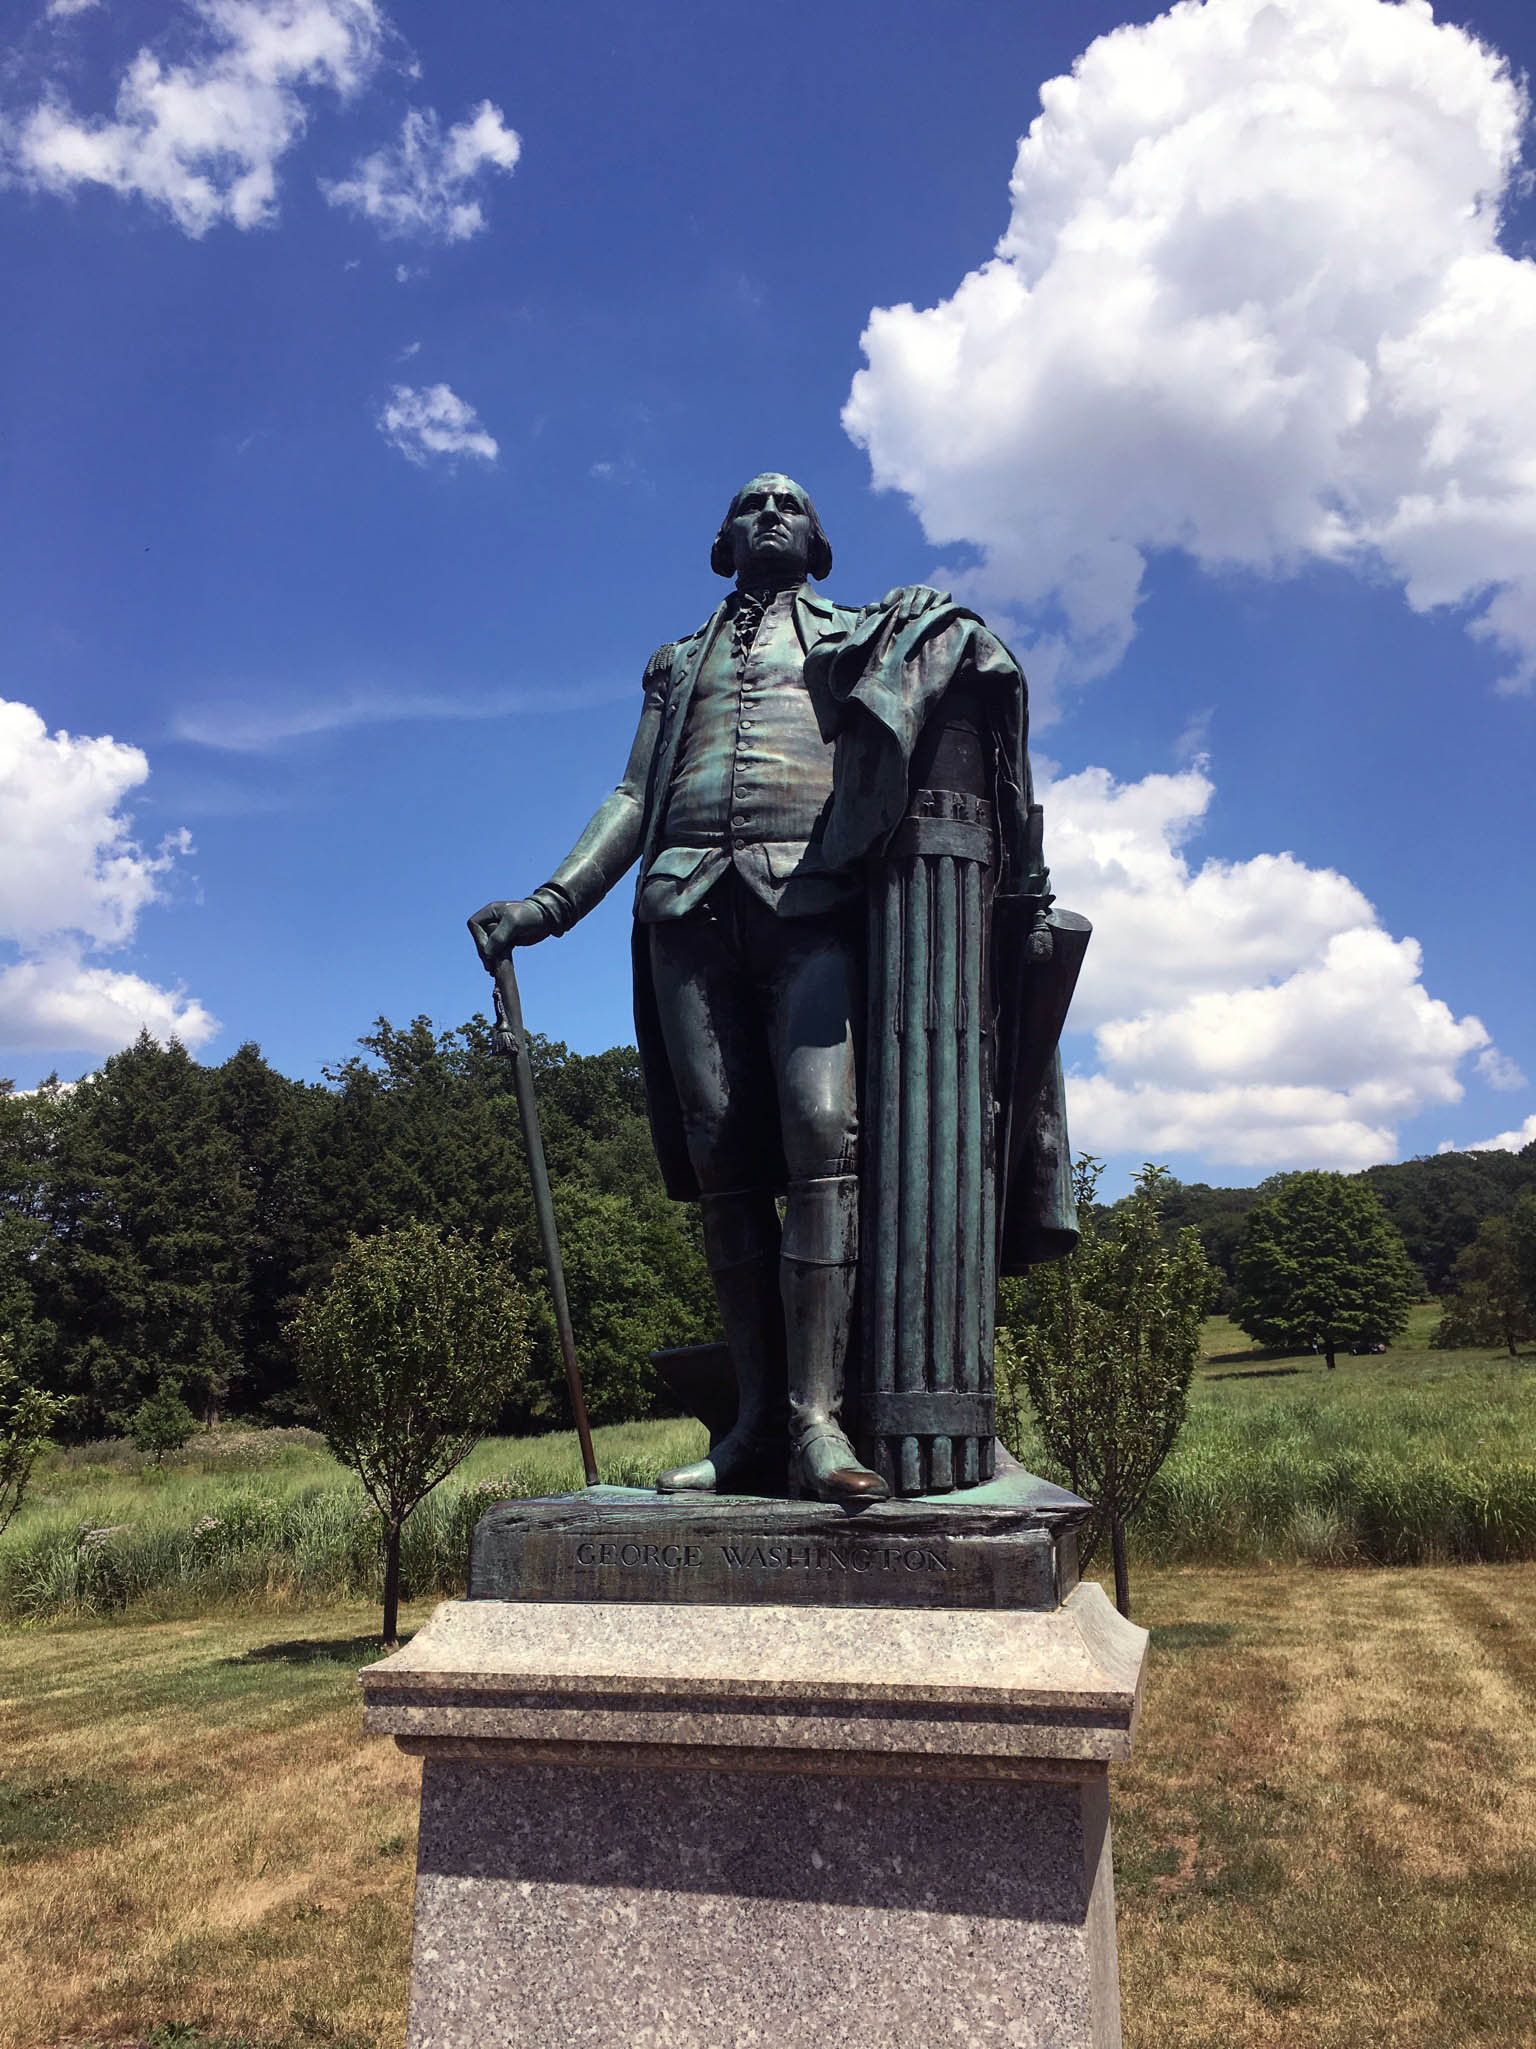  French sculptor Jean Antoine Houdon took exact measurements of Washington during a visit to Mount Vernon,&nbsp;and built a full body cast to create this bronze likeness. It is now situated on the grounds of Washington's Headquarters. Each accessory 